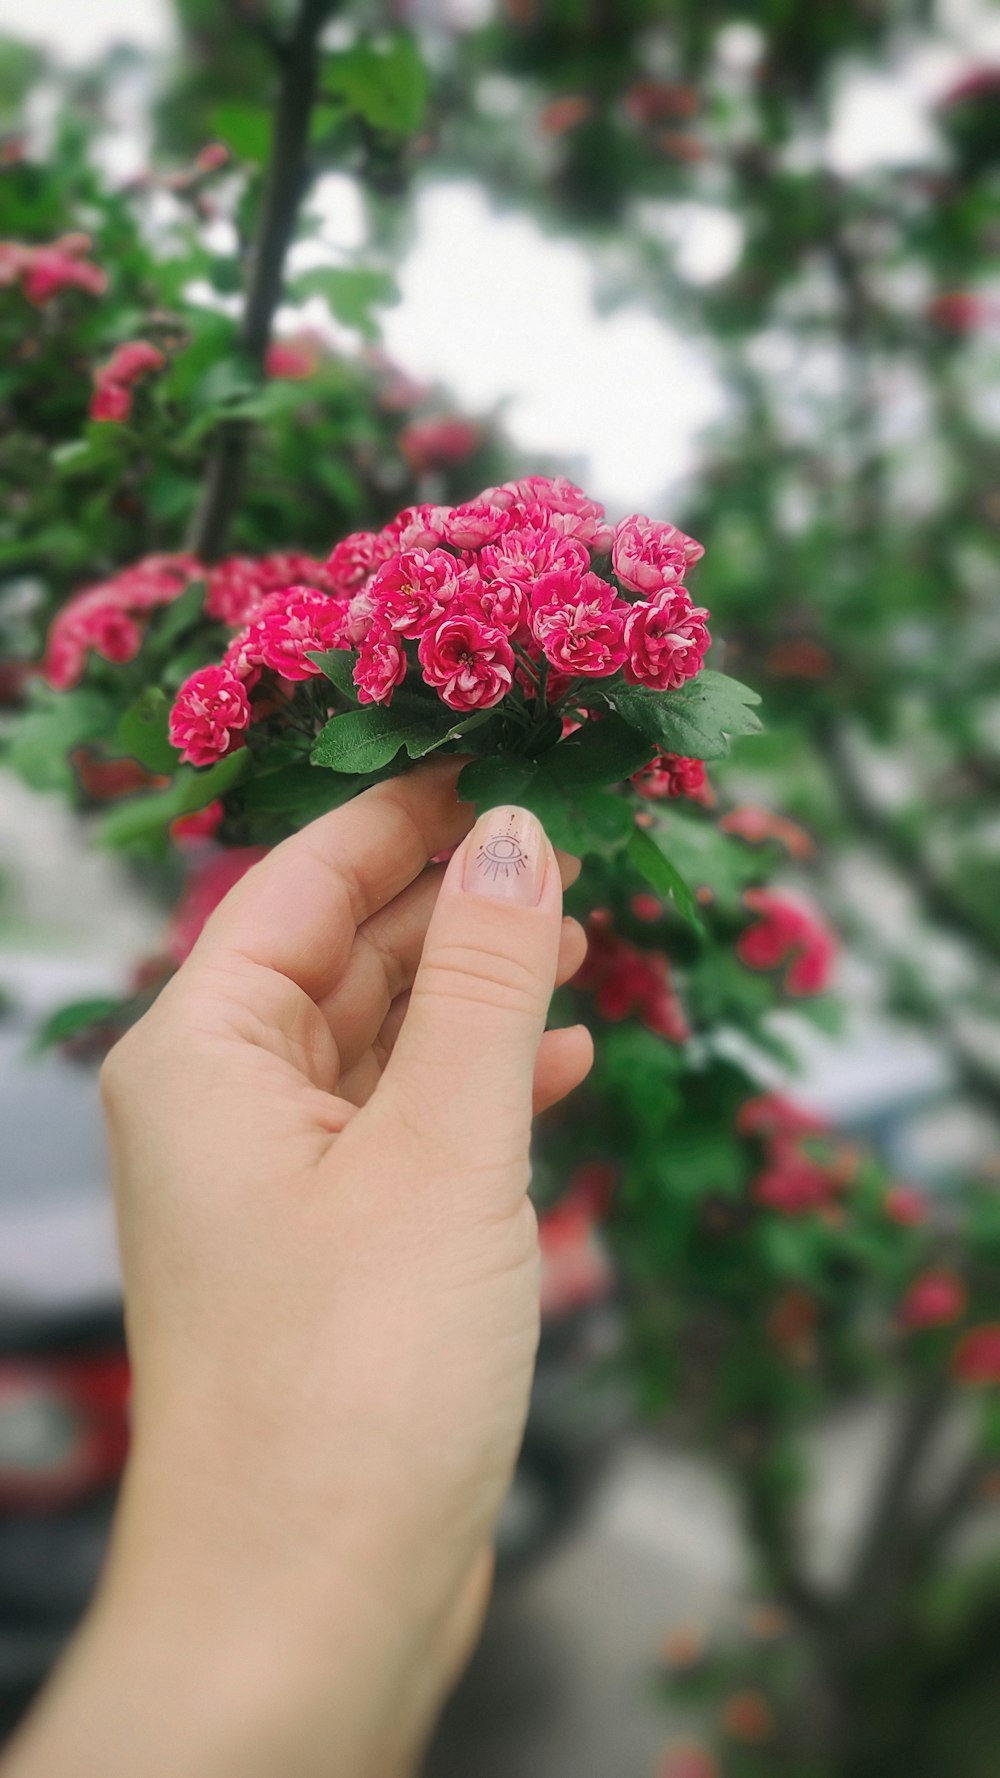 a person holding a small pink flower in their hand